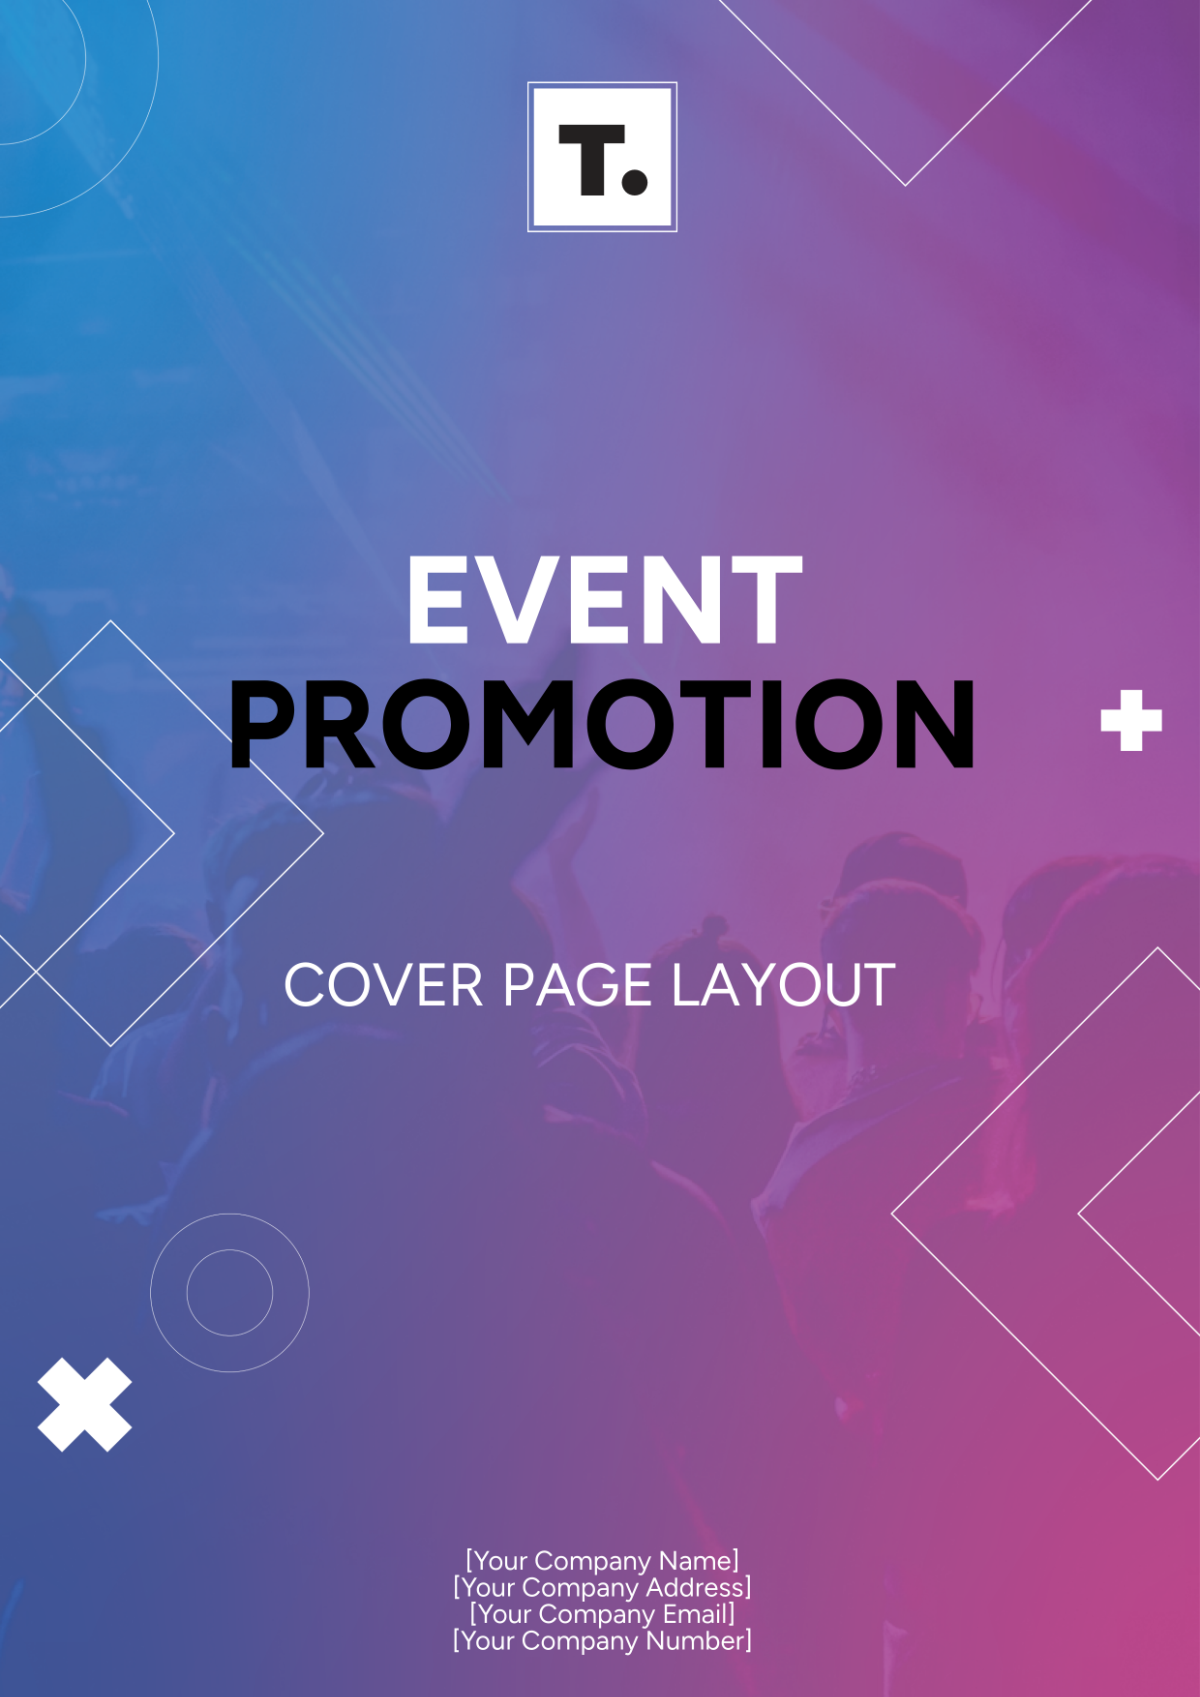 Event Promotion Cover Page Layout